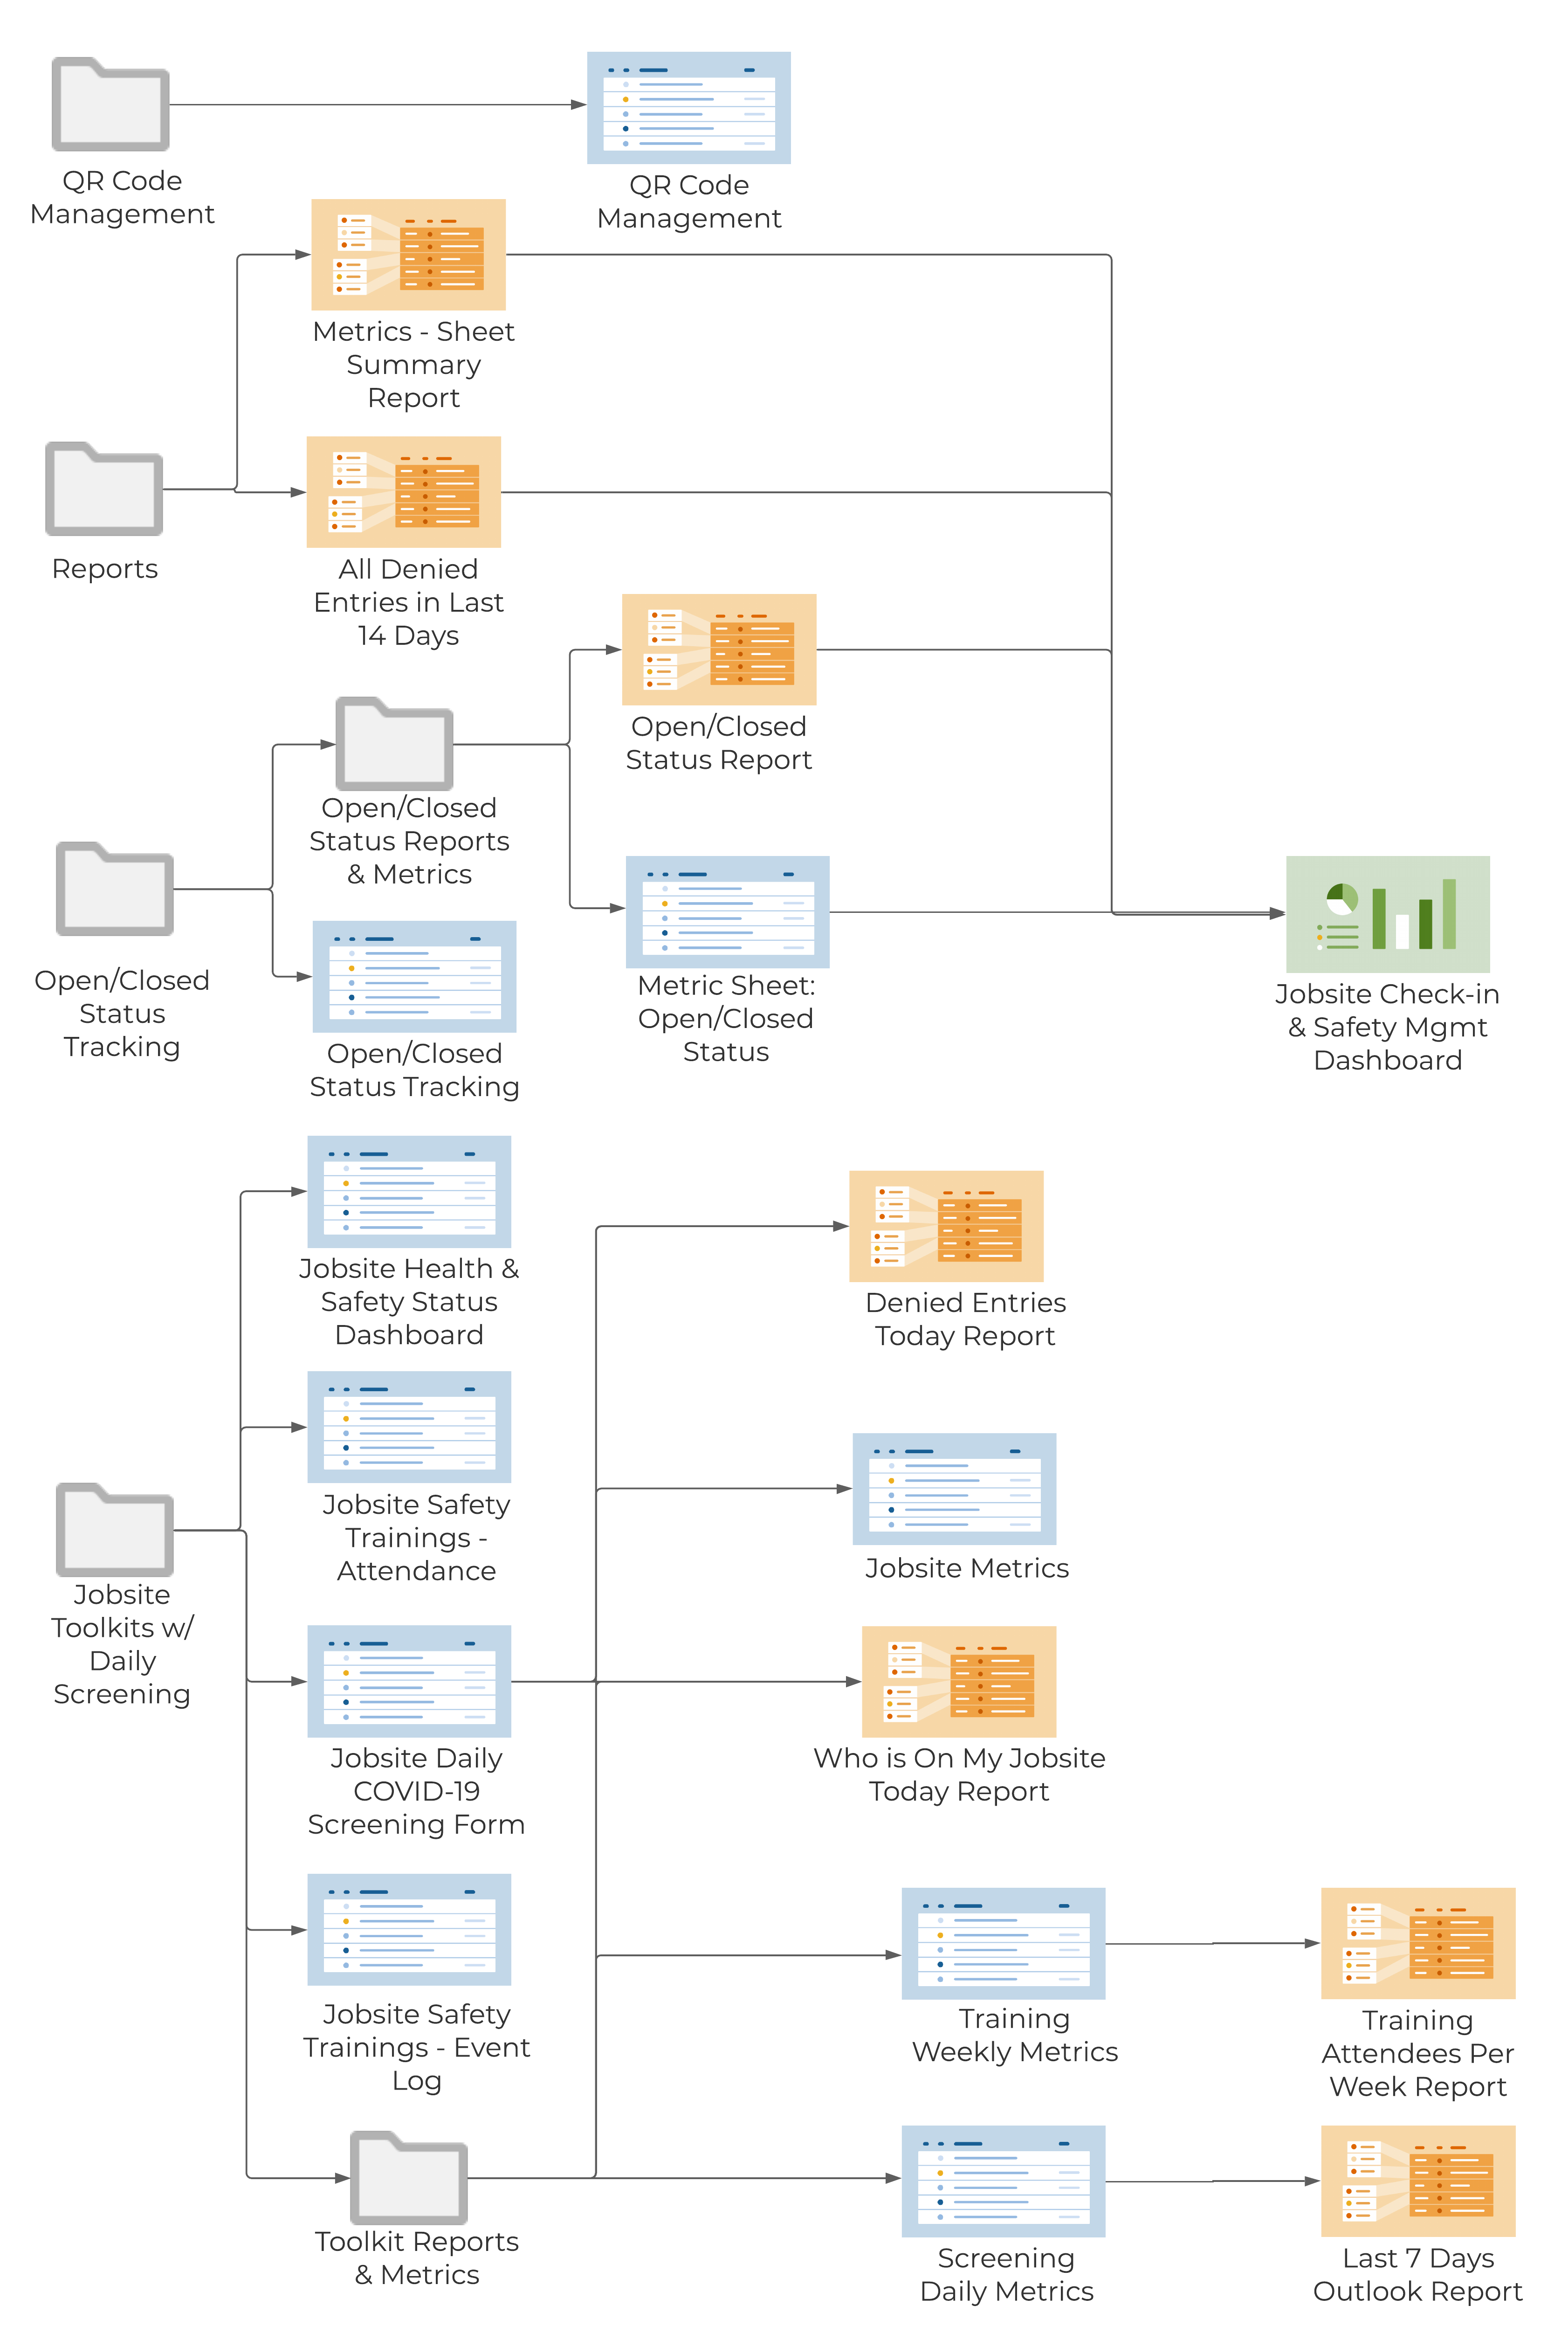 Template Set Flow Chart - Jobsite Check-in and safety management